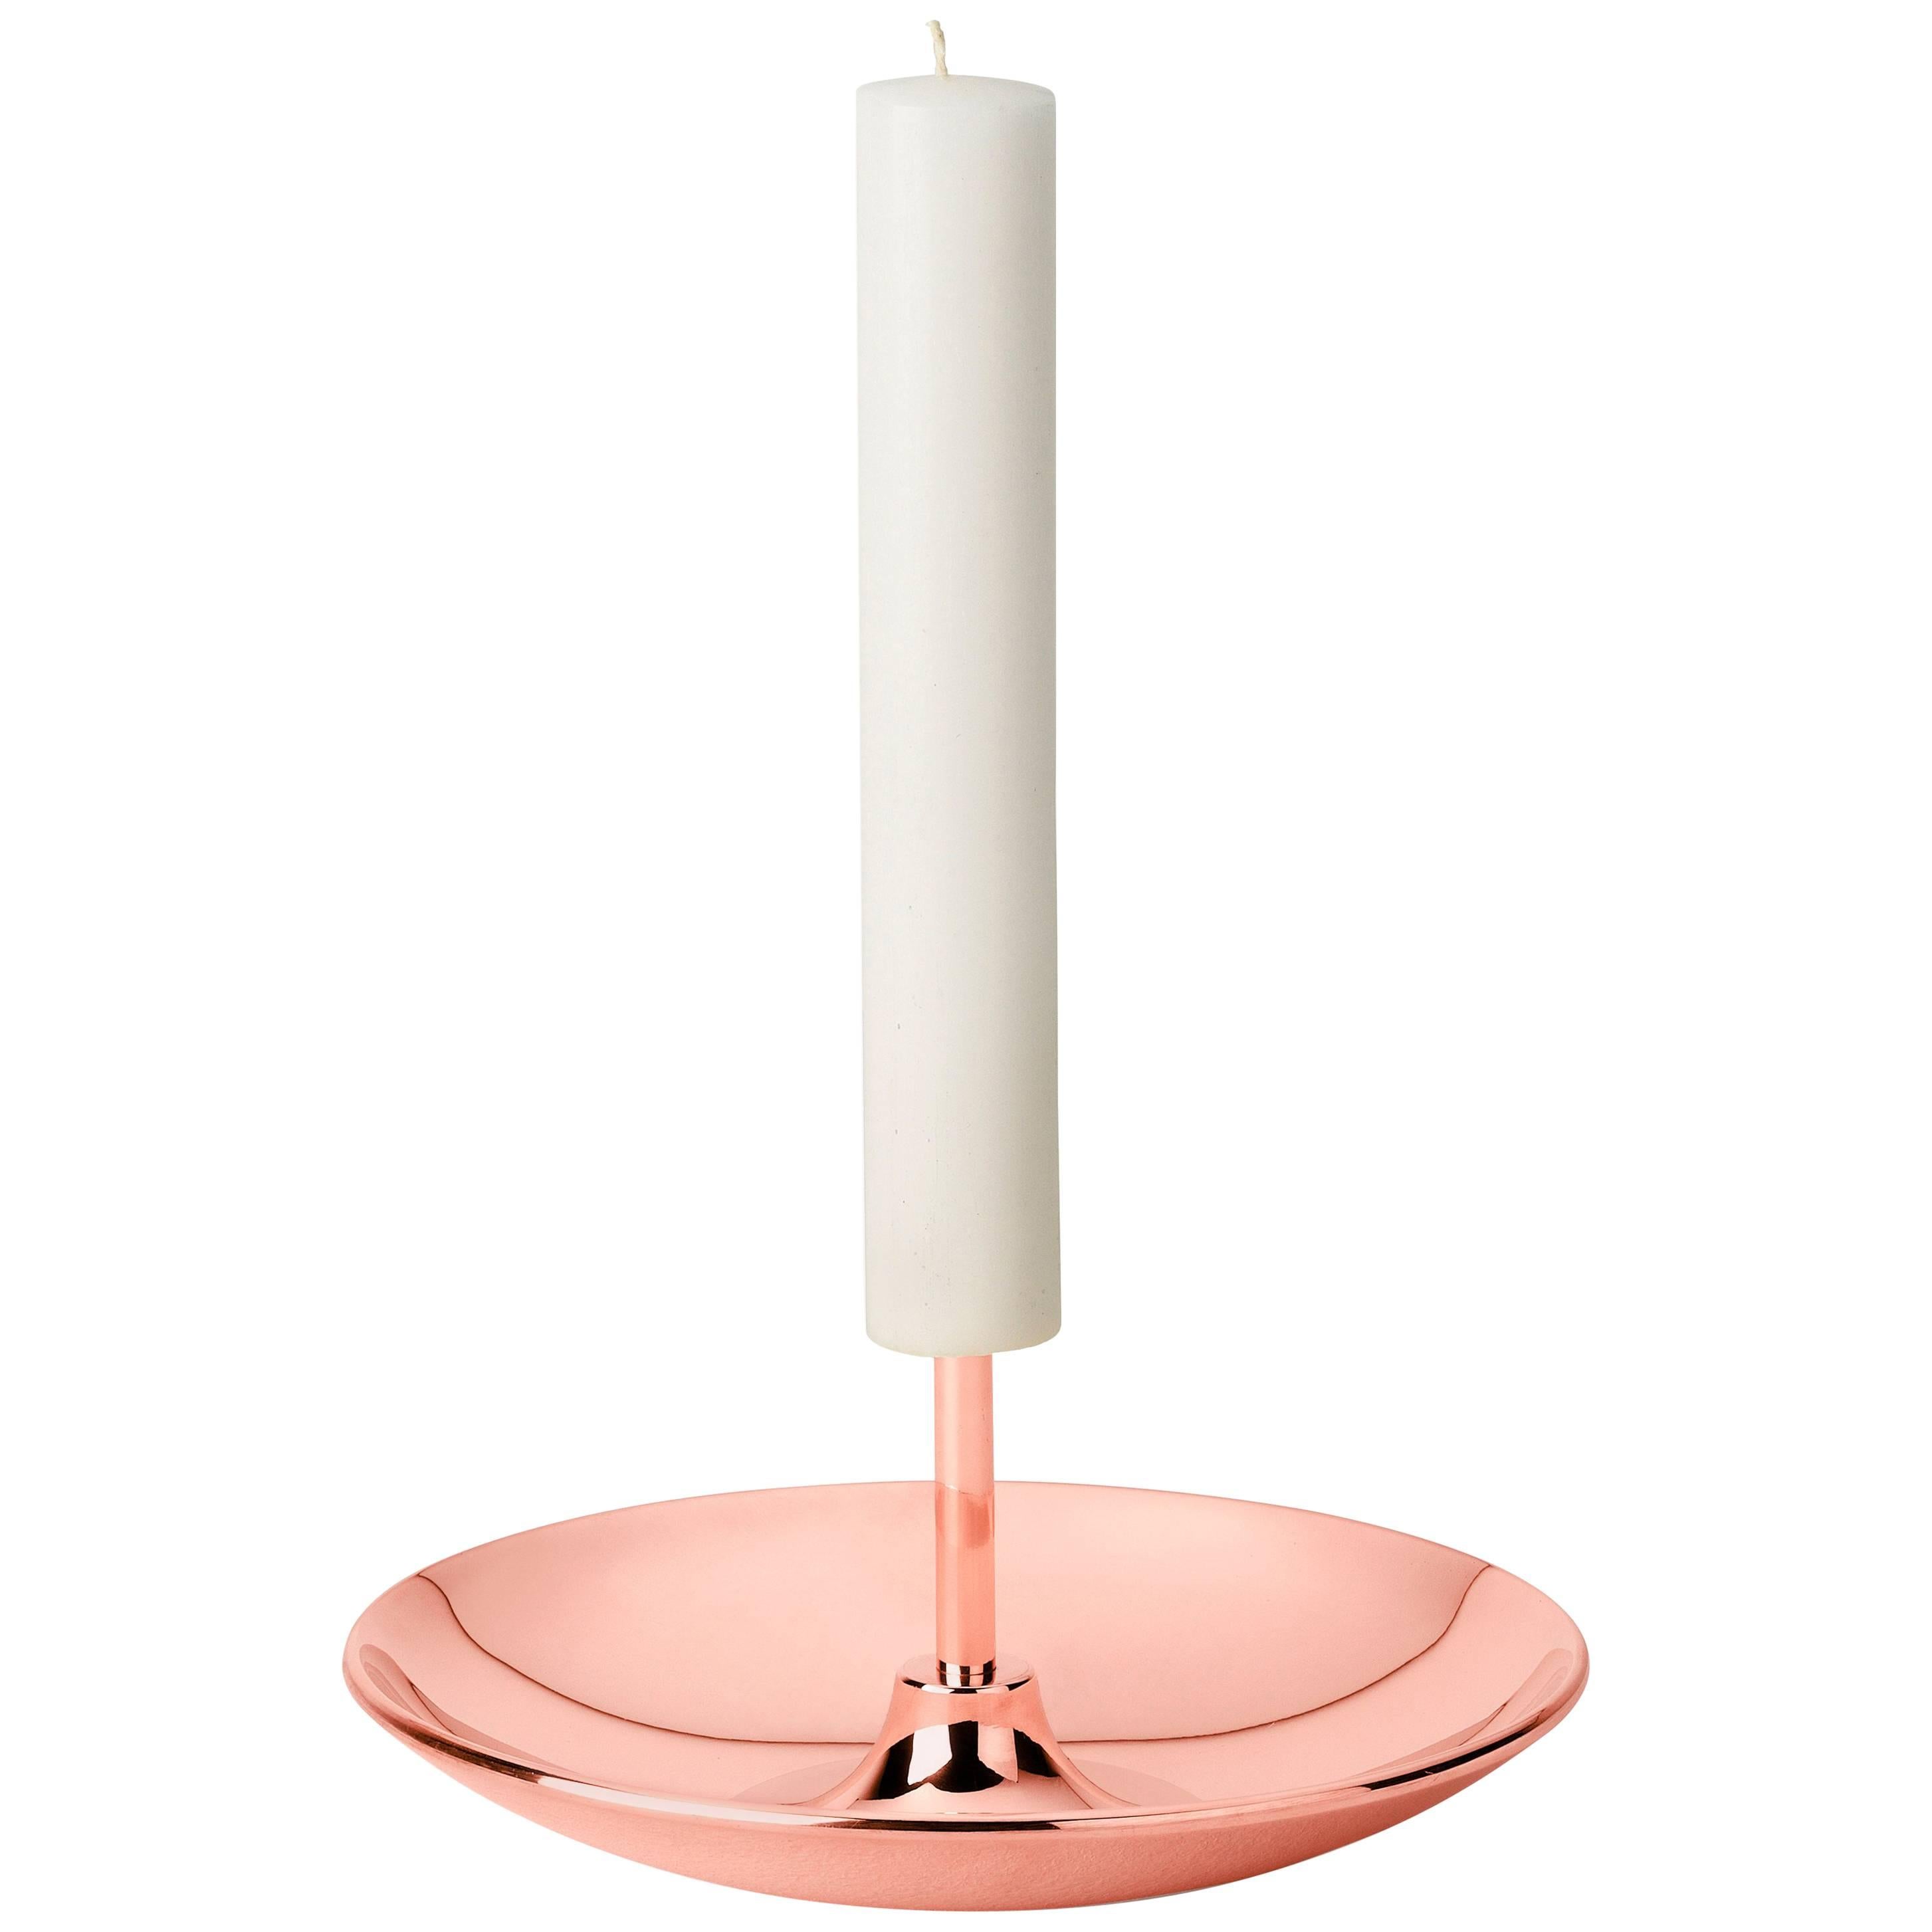 Ghidini 1961 There "Push Pin" Candlestick in Rose Gold Finish